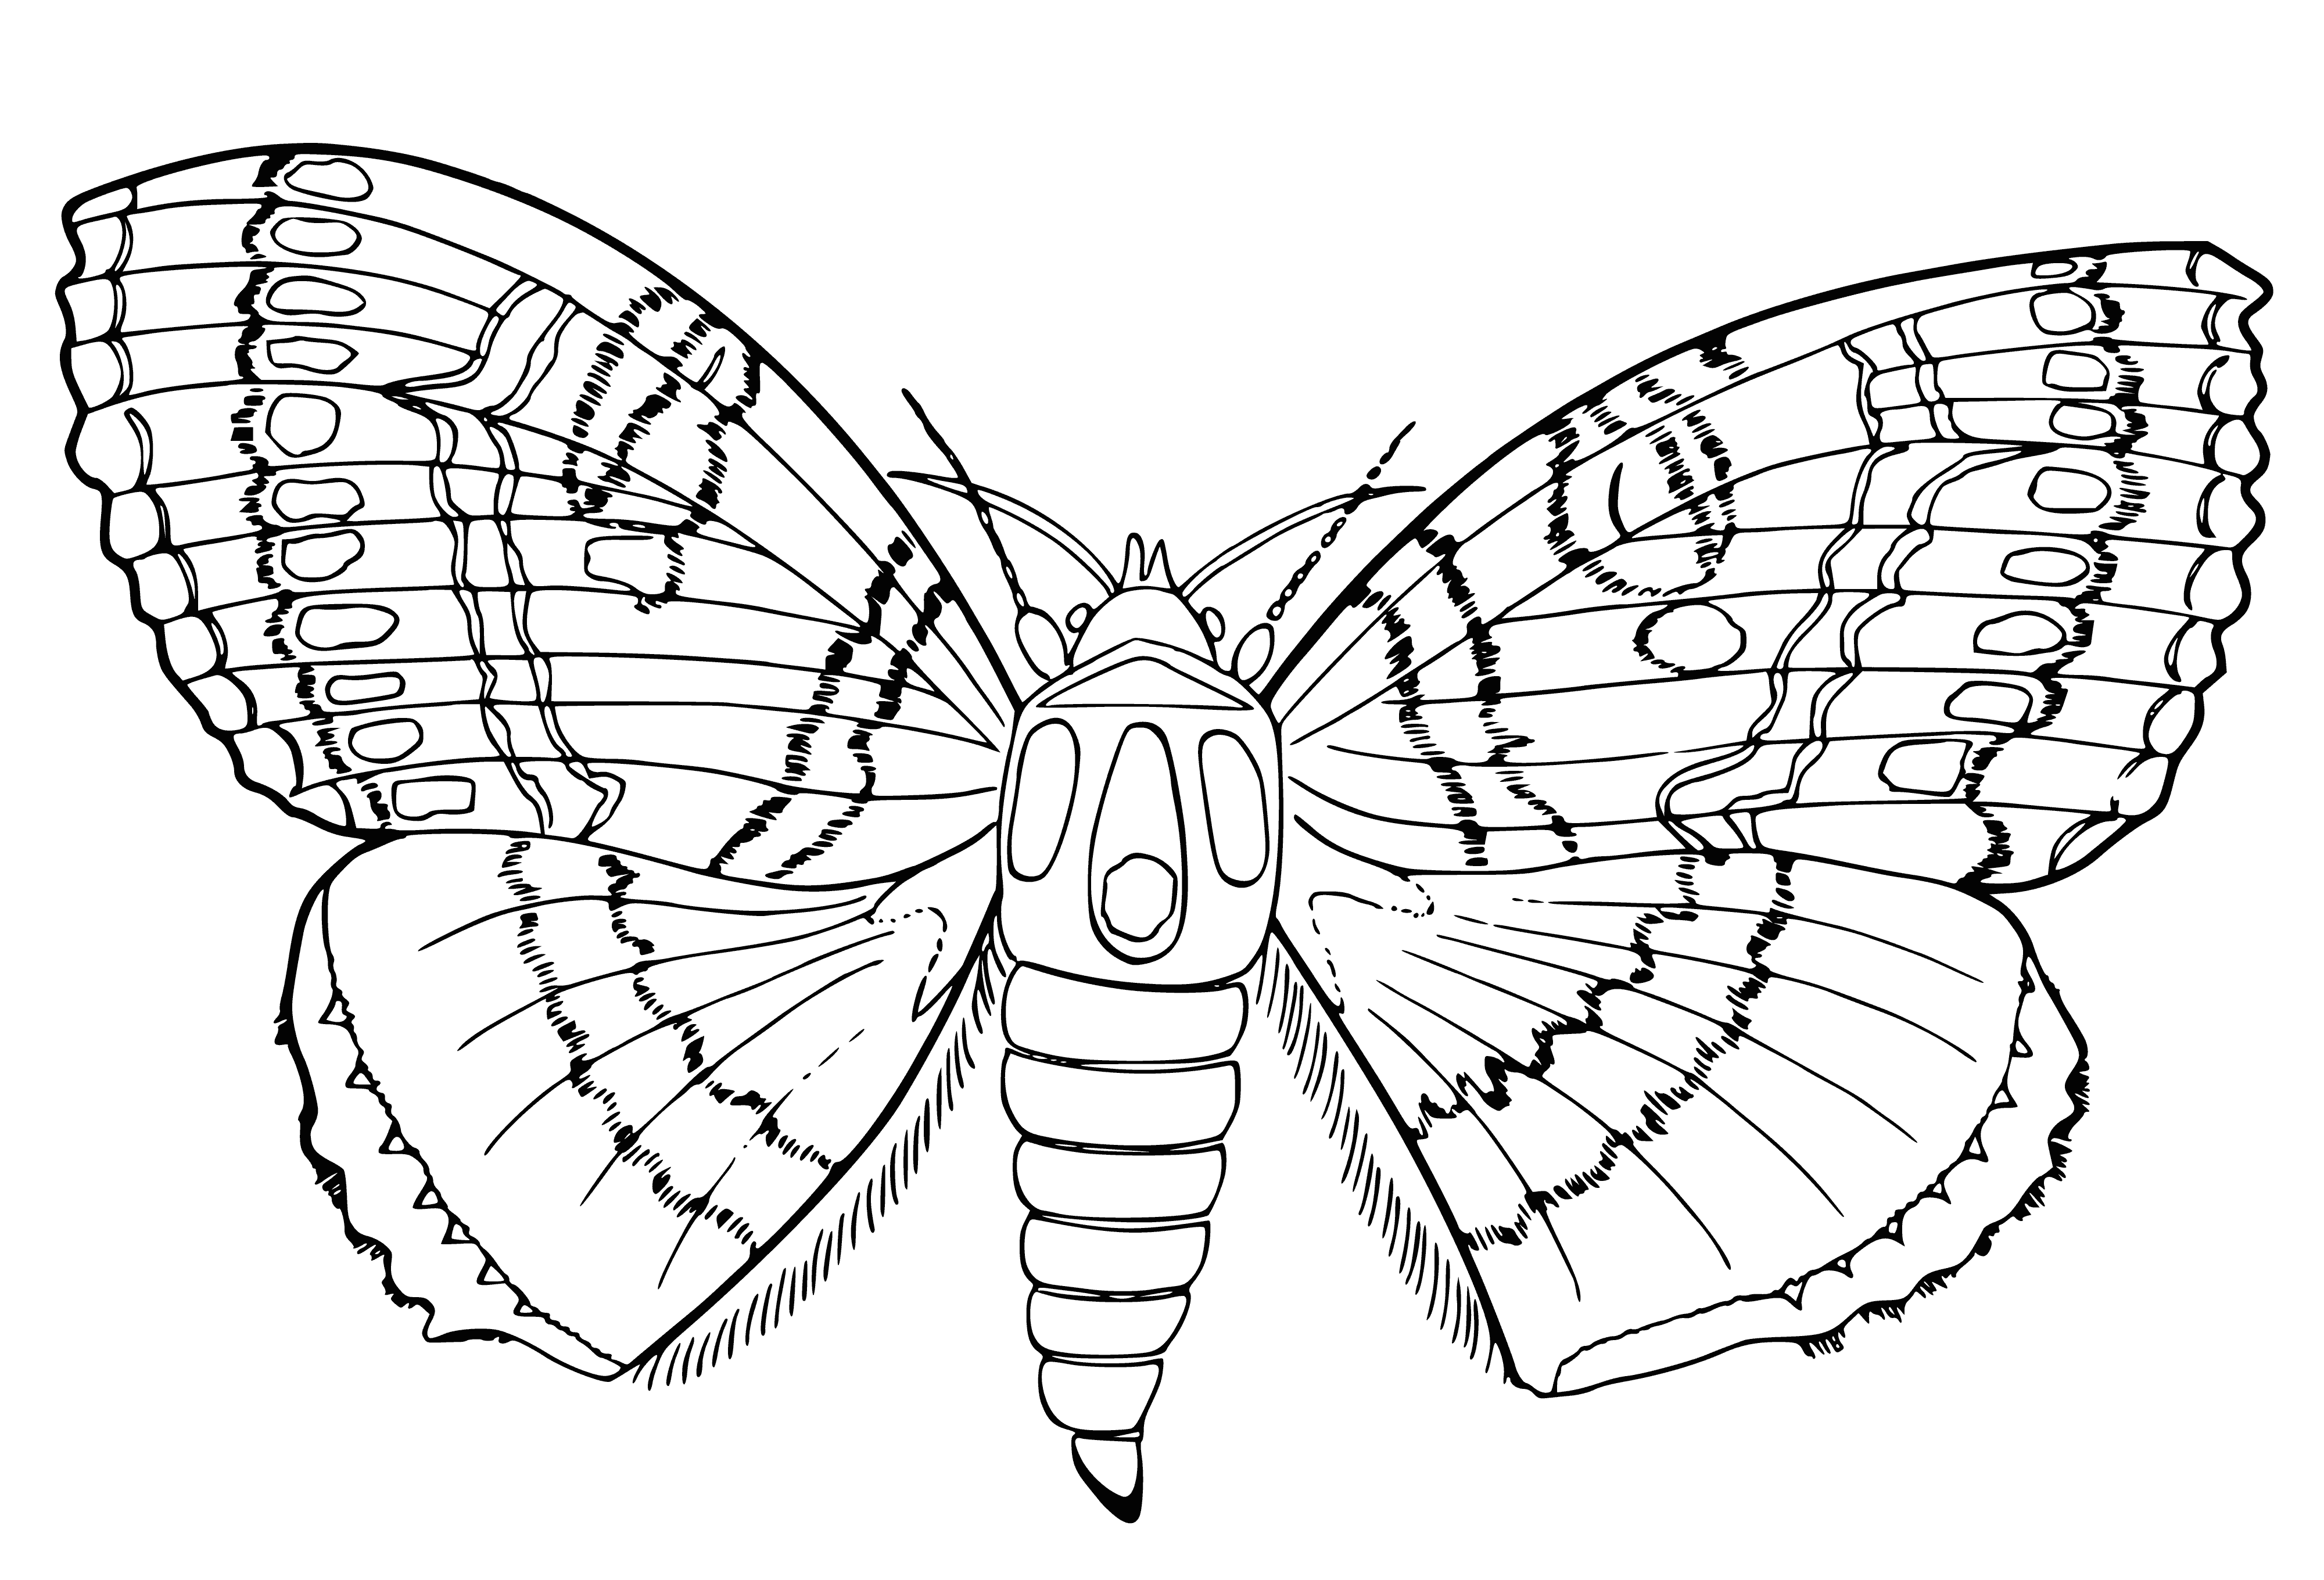 coloring page: Butterfly with colorful wings and long antennae, sitting on a leaf or flower.